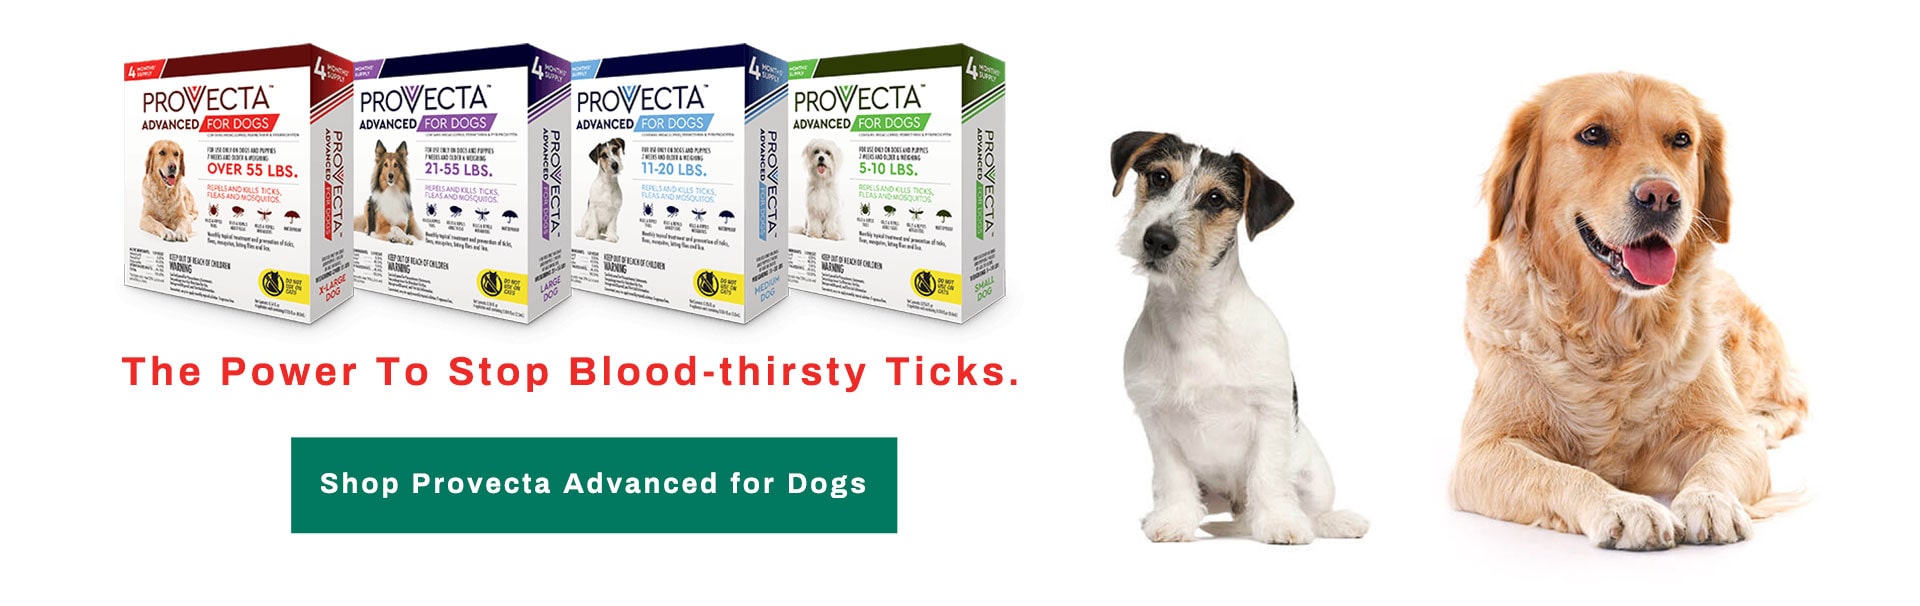 Shop Povecta Advanced for Dogs